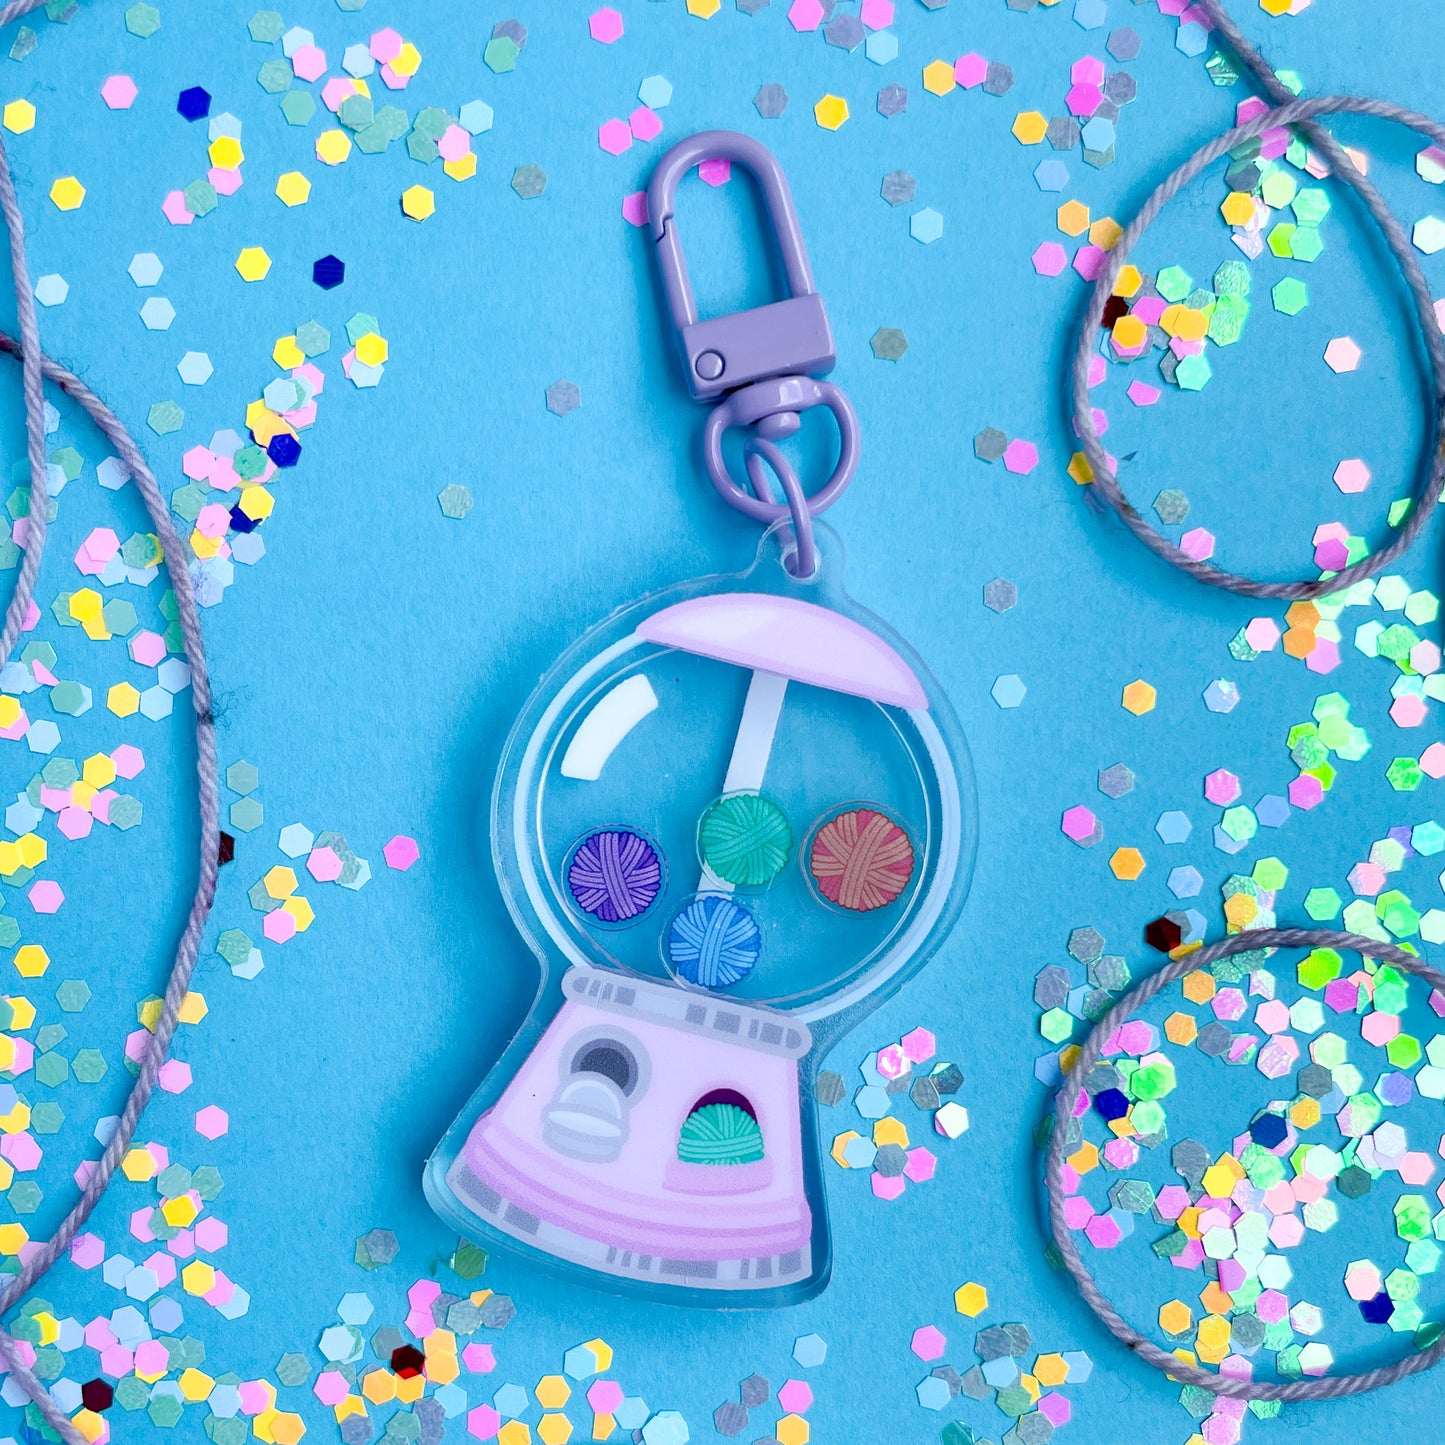 An acrylic keychain with a lavender closure that is shaped like a gumball machine that is filled with yarn balls this is on a blue background covered in yarn and confetti. 